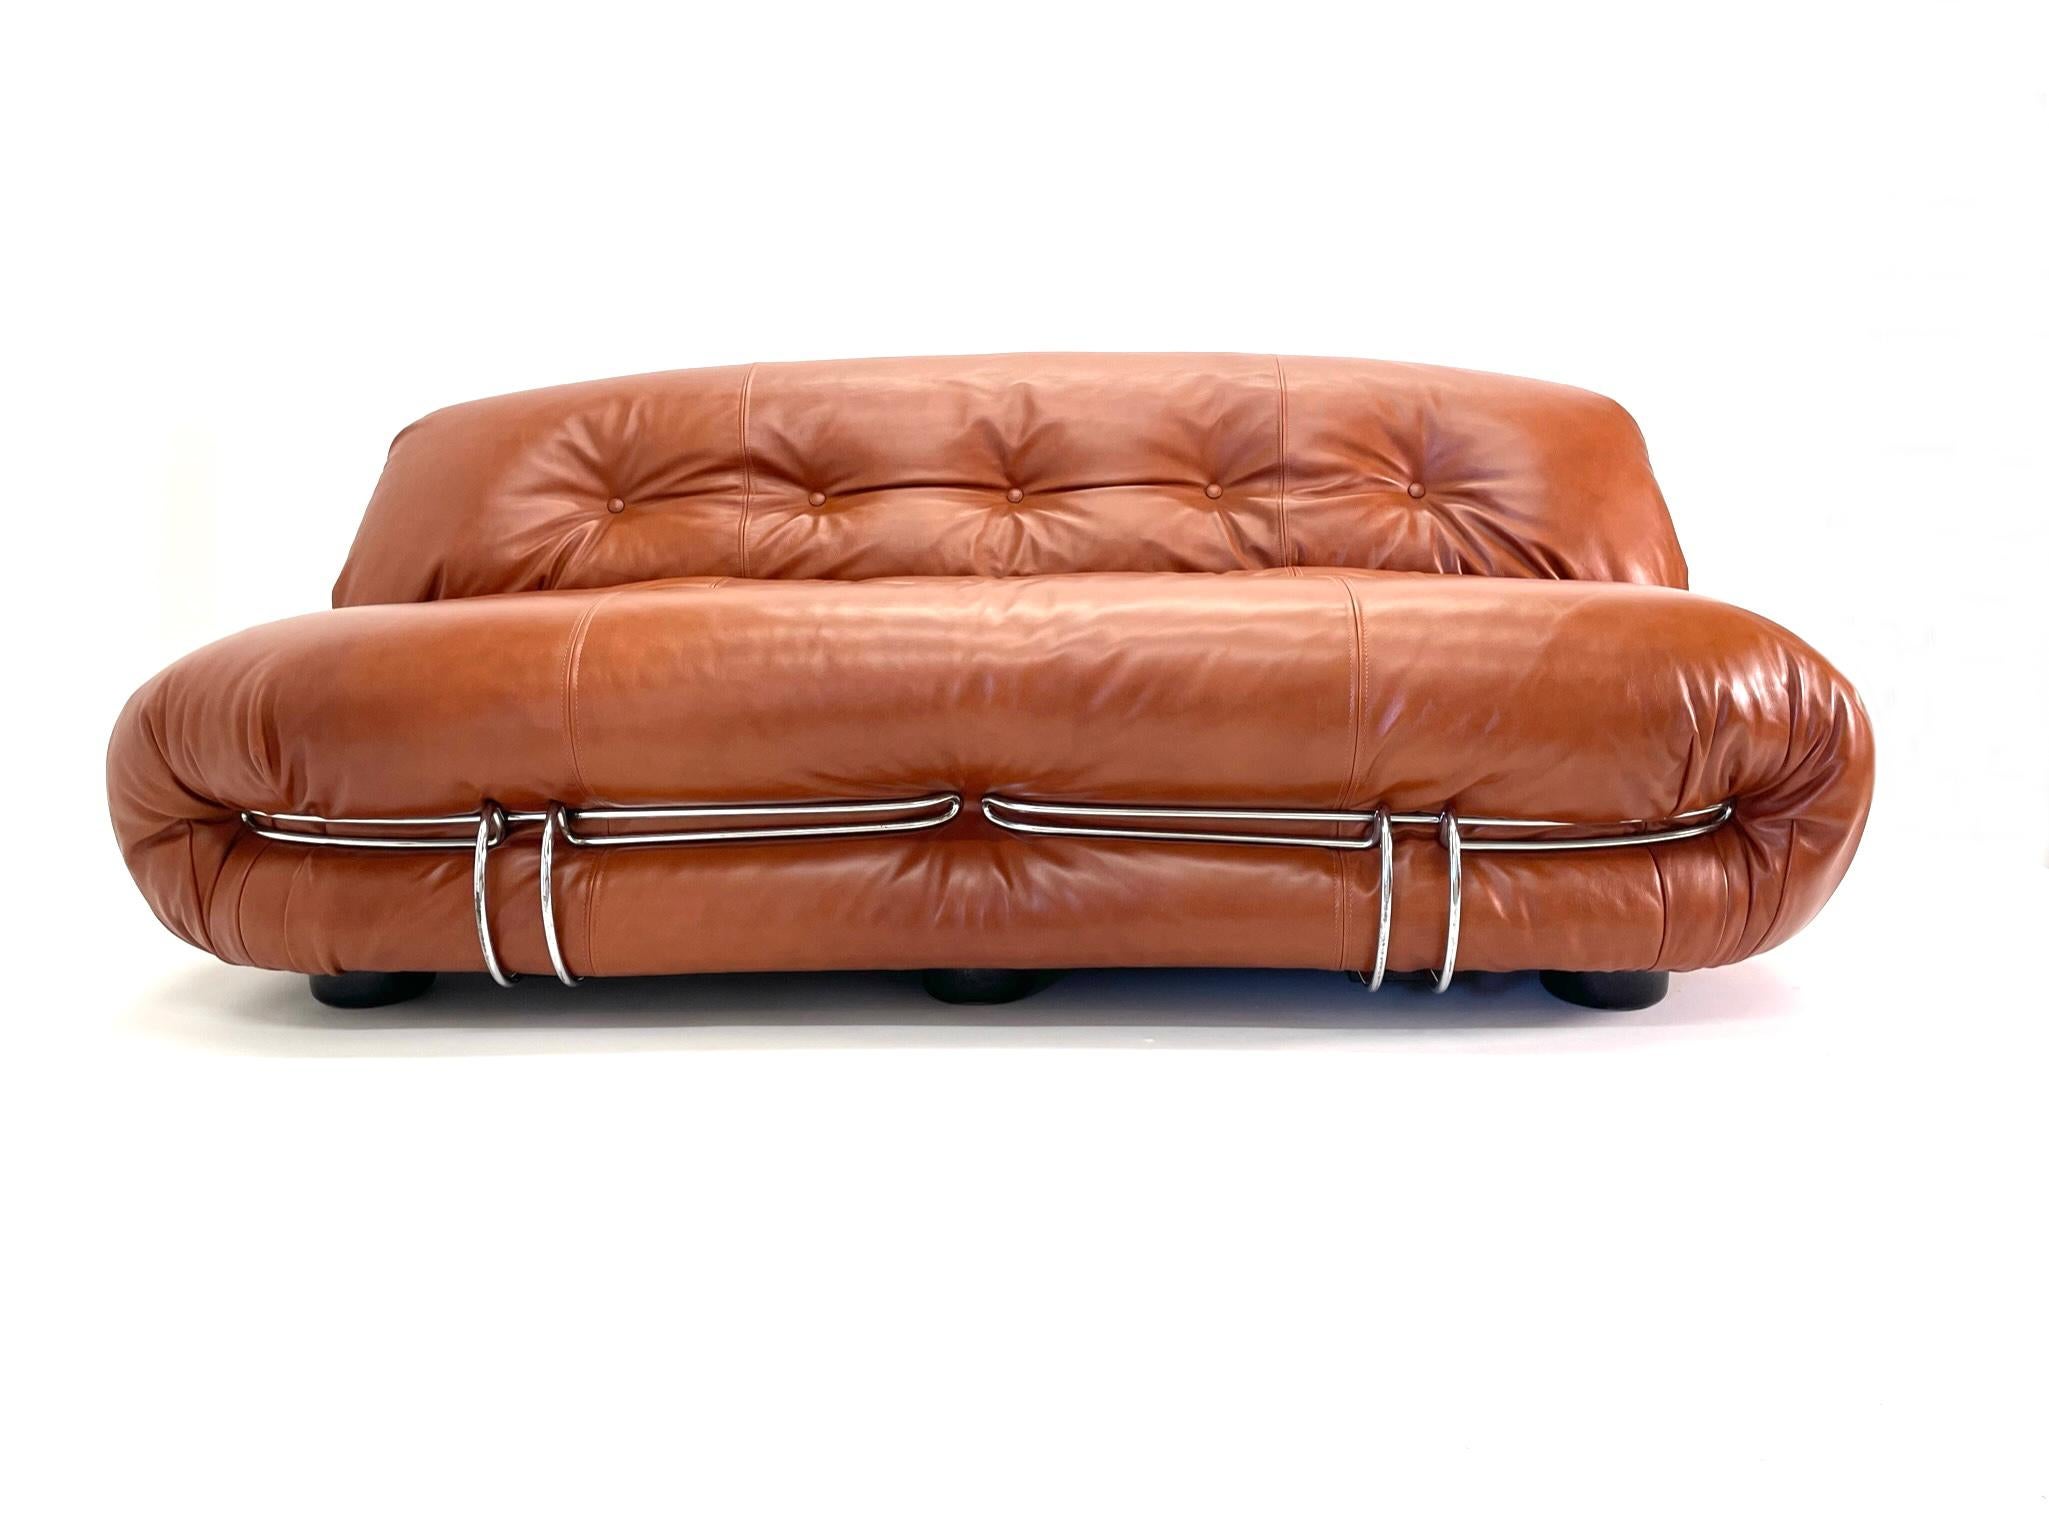 Doesnt get cooler and comfier than this!

We have 2 gorgeous Soriana sofas available. Both have been reupholstered in soft new leather Italian. The metal detail on the sofas make it stand out. 

Designed by Afra and Tobia Scarpa for Cassina this